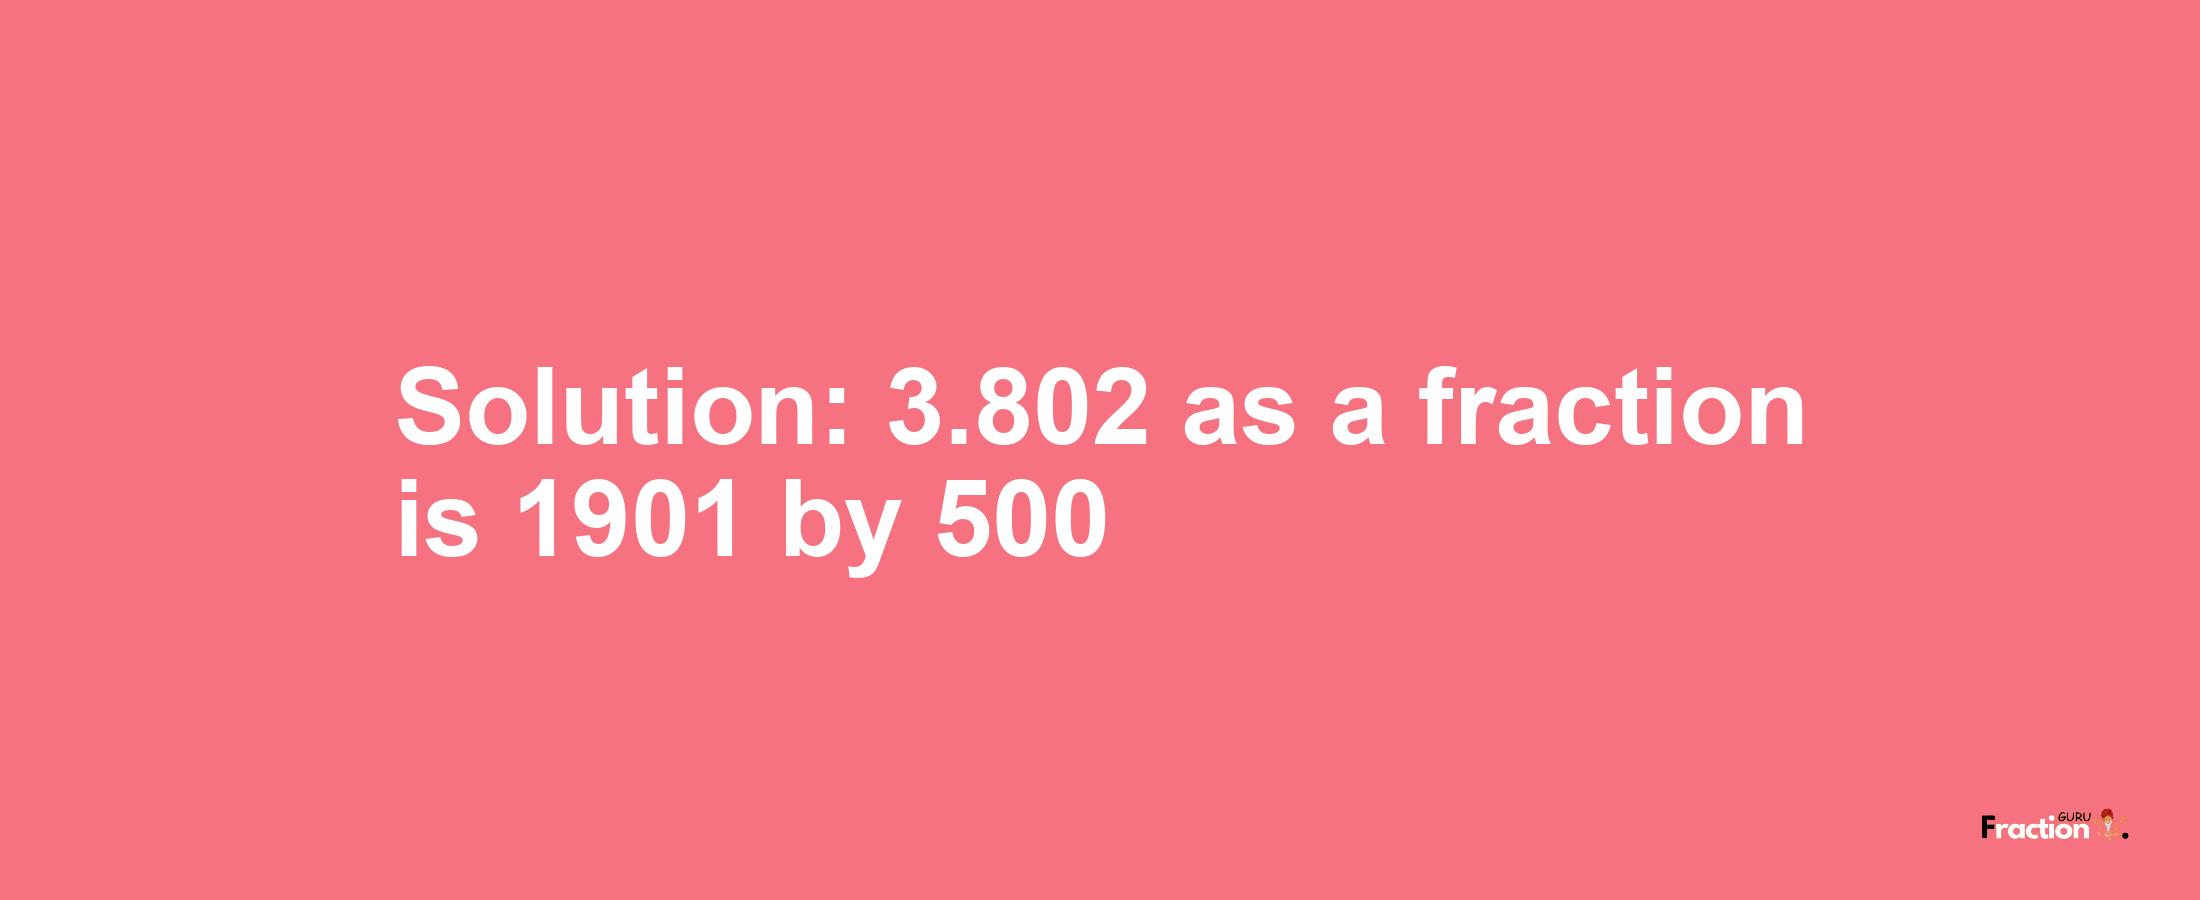 Solution:3.802 as a fraction is 1901/500